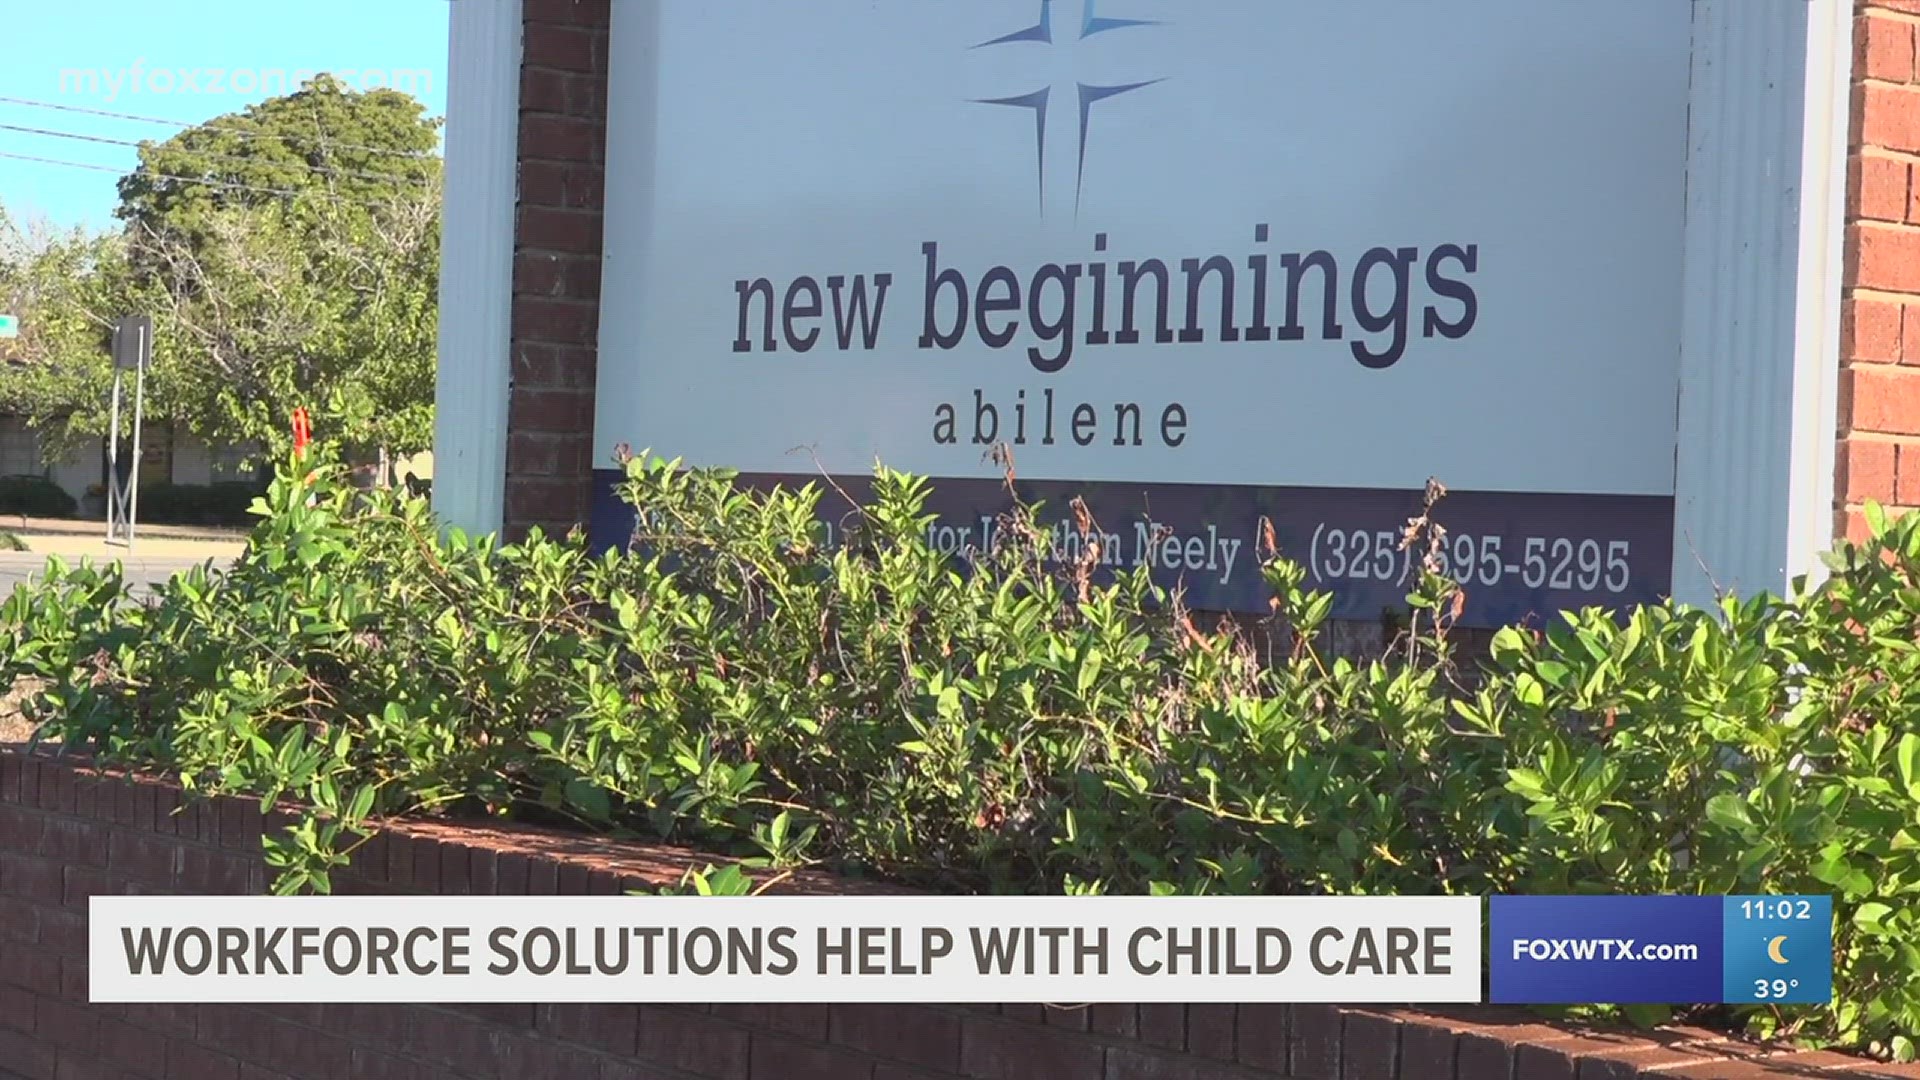 Workforce Solutions facilitated $20,000 of childcare resources to New Beginnings in Abilene.